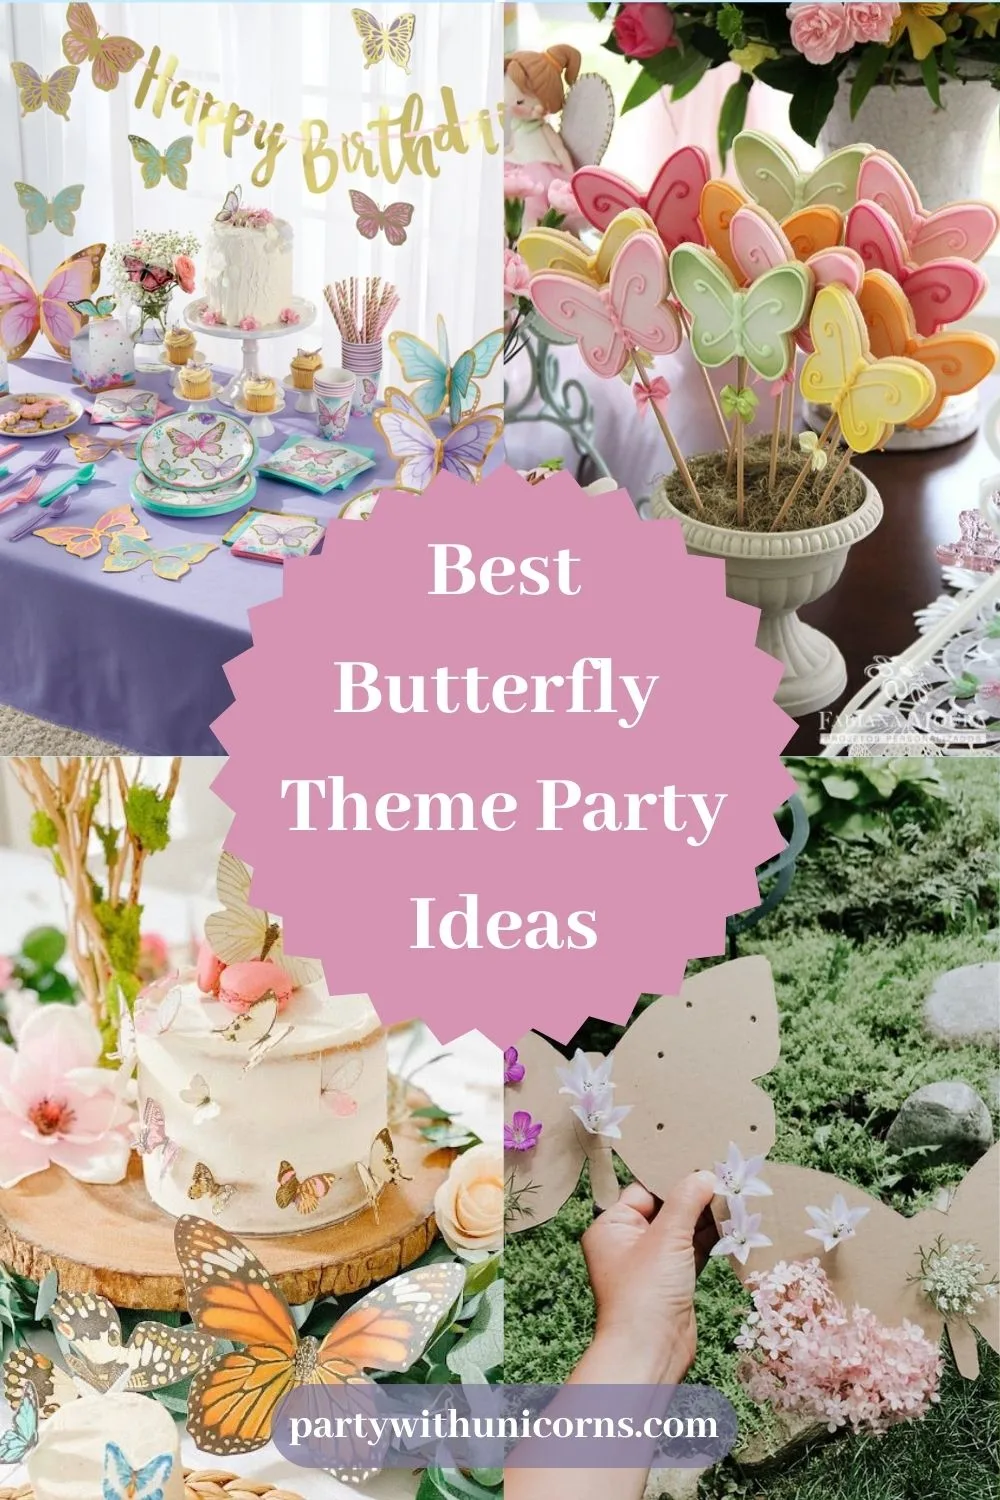 Best Butterfly Theme Party Ideas